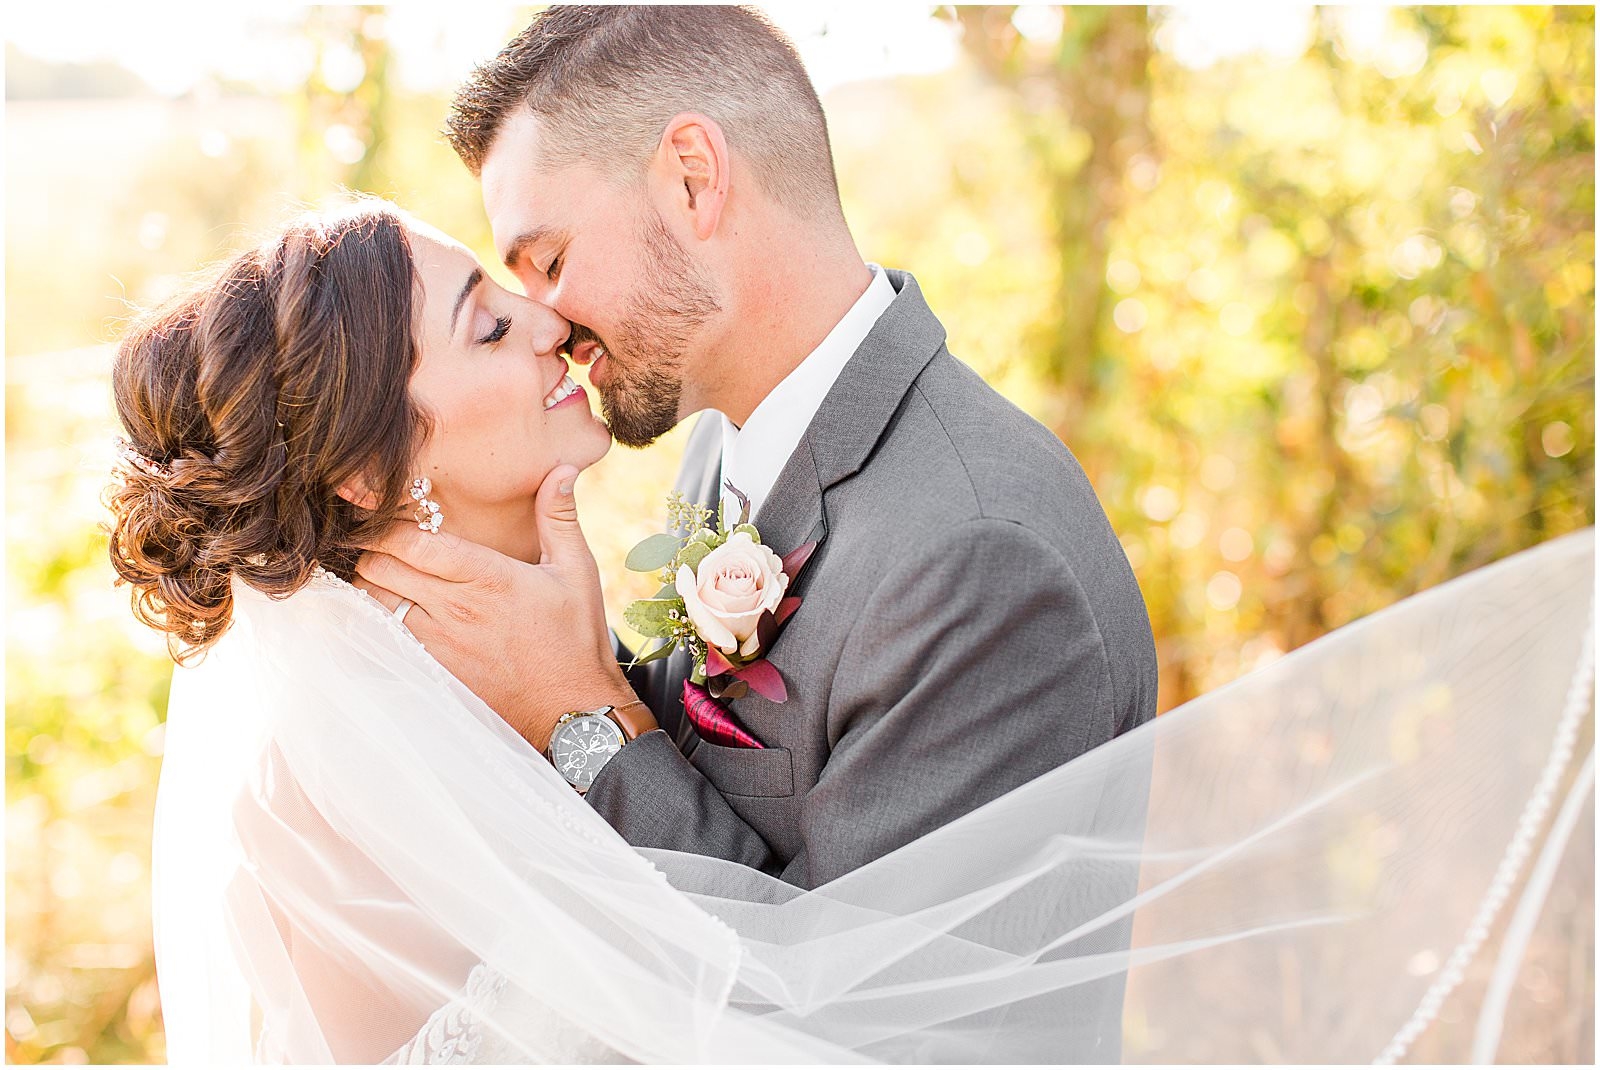 A Stunning Fall Wedding in Indianapolis, IN |. Sally and Andrew | Bret and Brandie Photography 0126.jpg